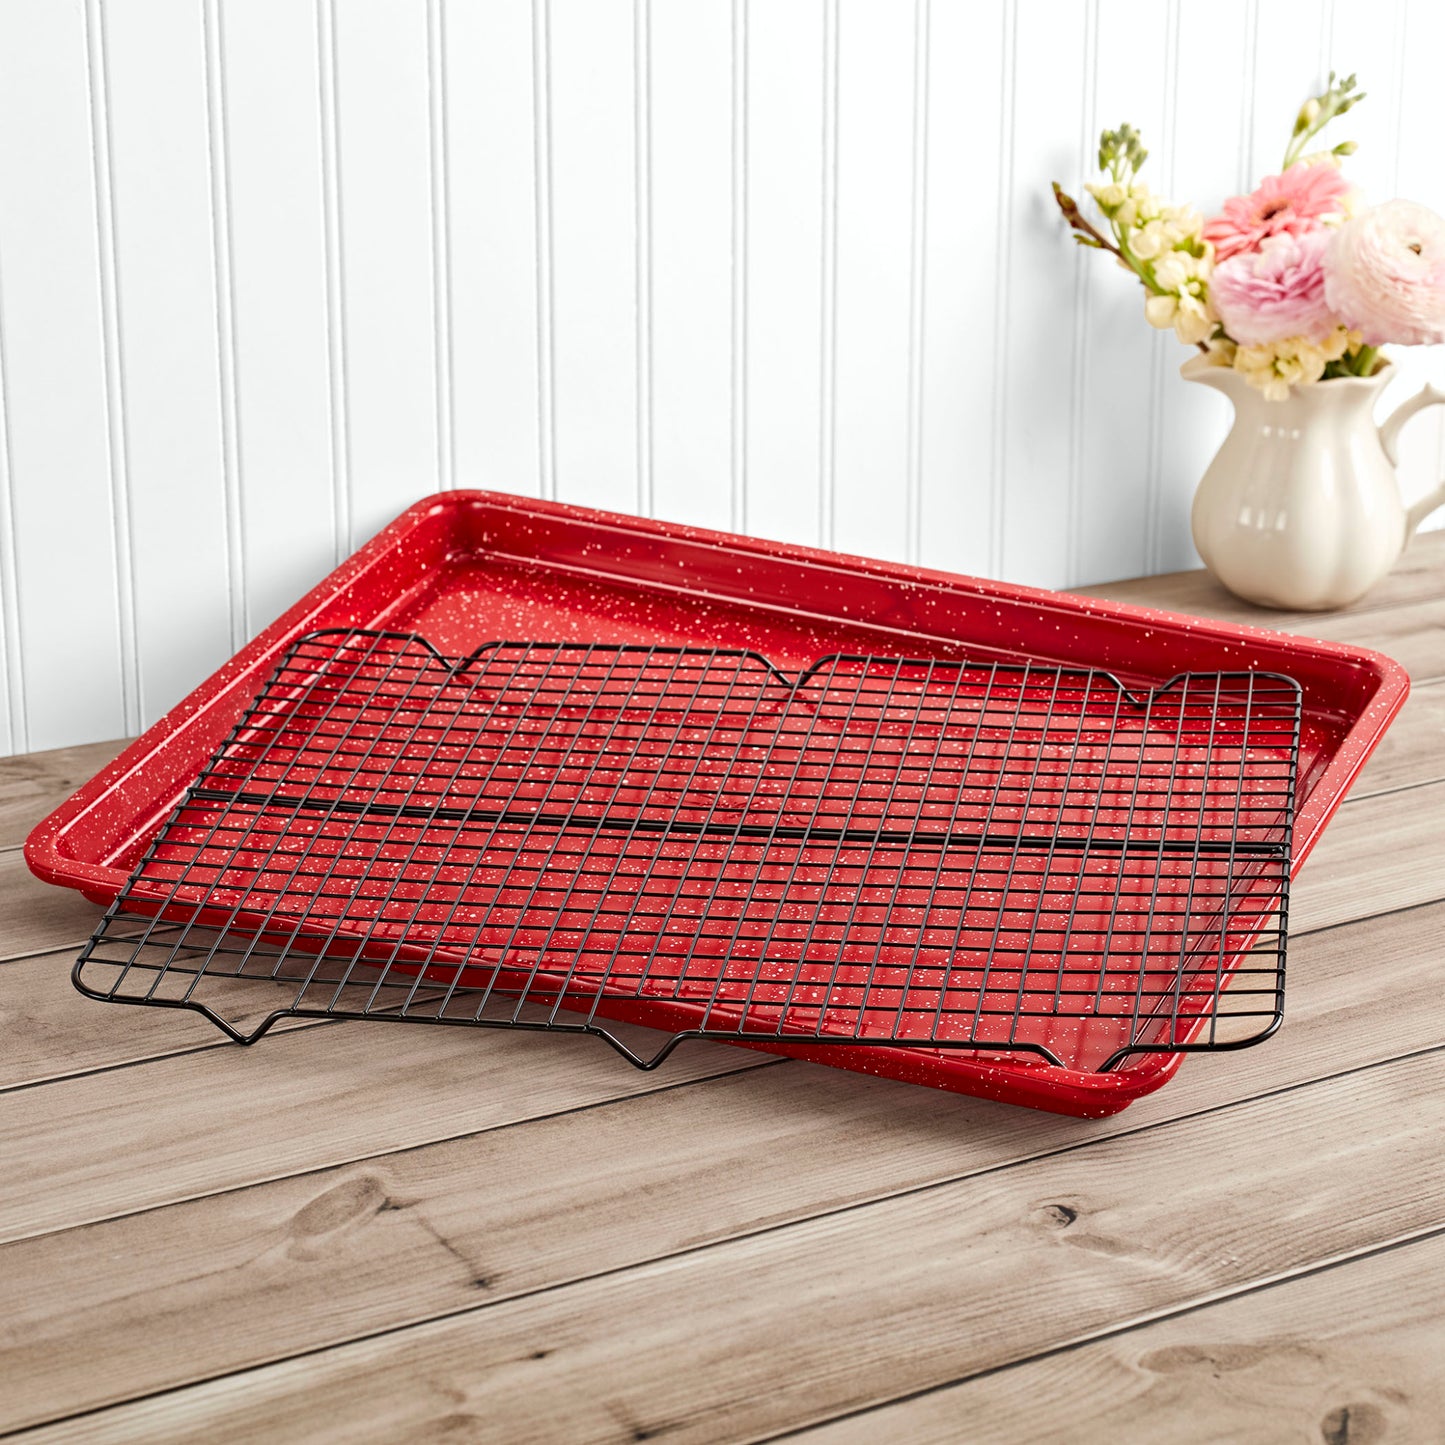 Dolly 17" Baking Sheet with Cooling Rack - Red